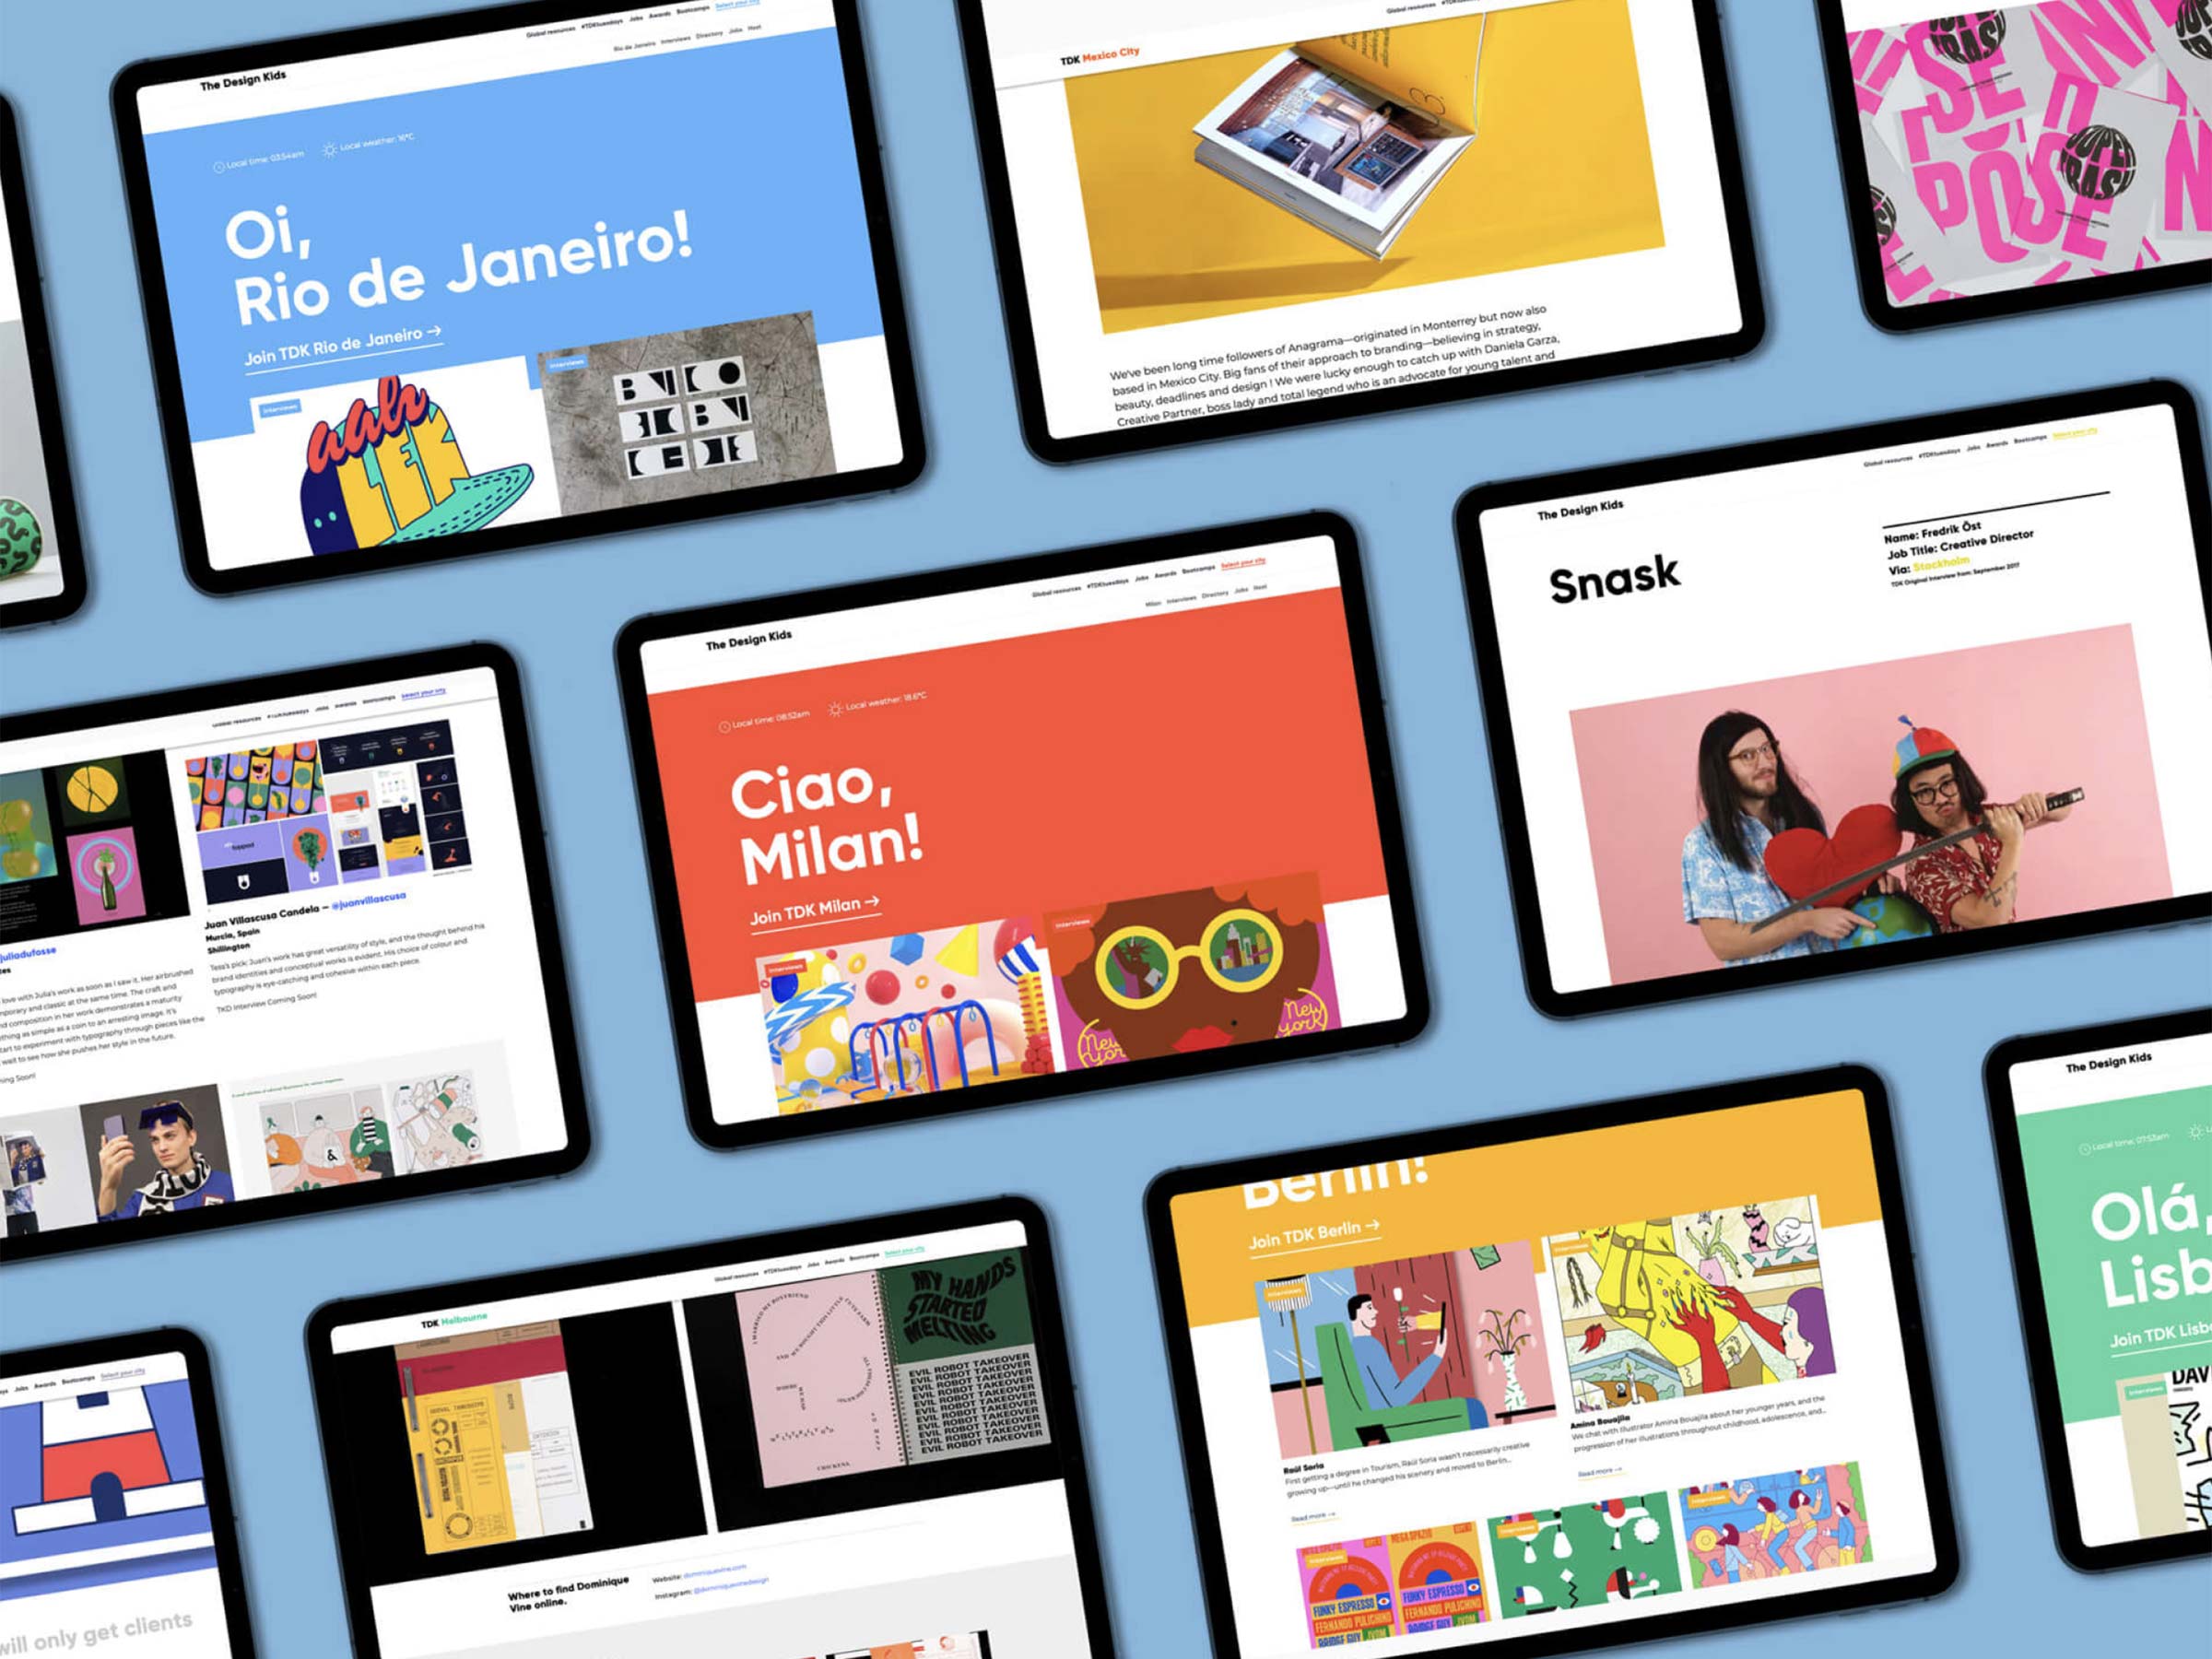 Made-Somewhere-Blog-Post-Are you finishing a design degree or about to take the leap into an internship? Here are some hints and advice for design grads and interns - ipads in a row feature The Design Kids Website